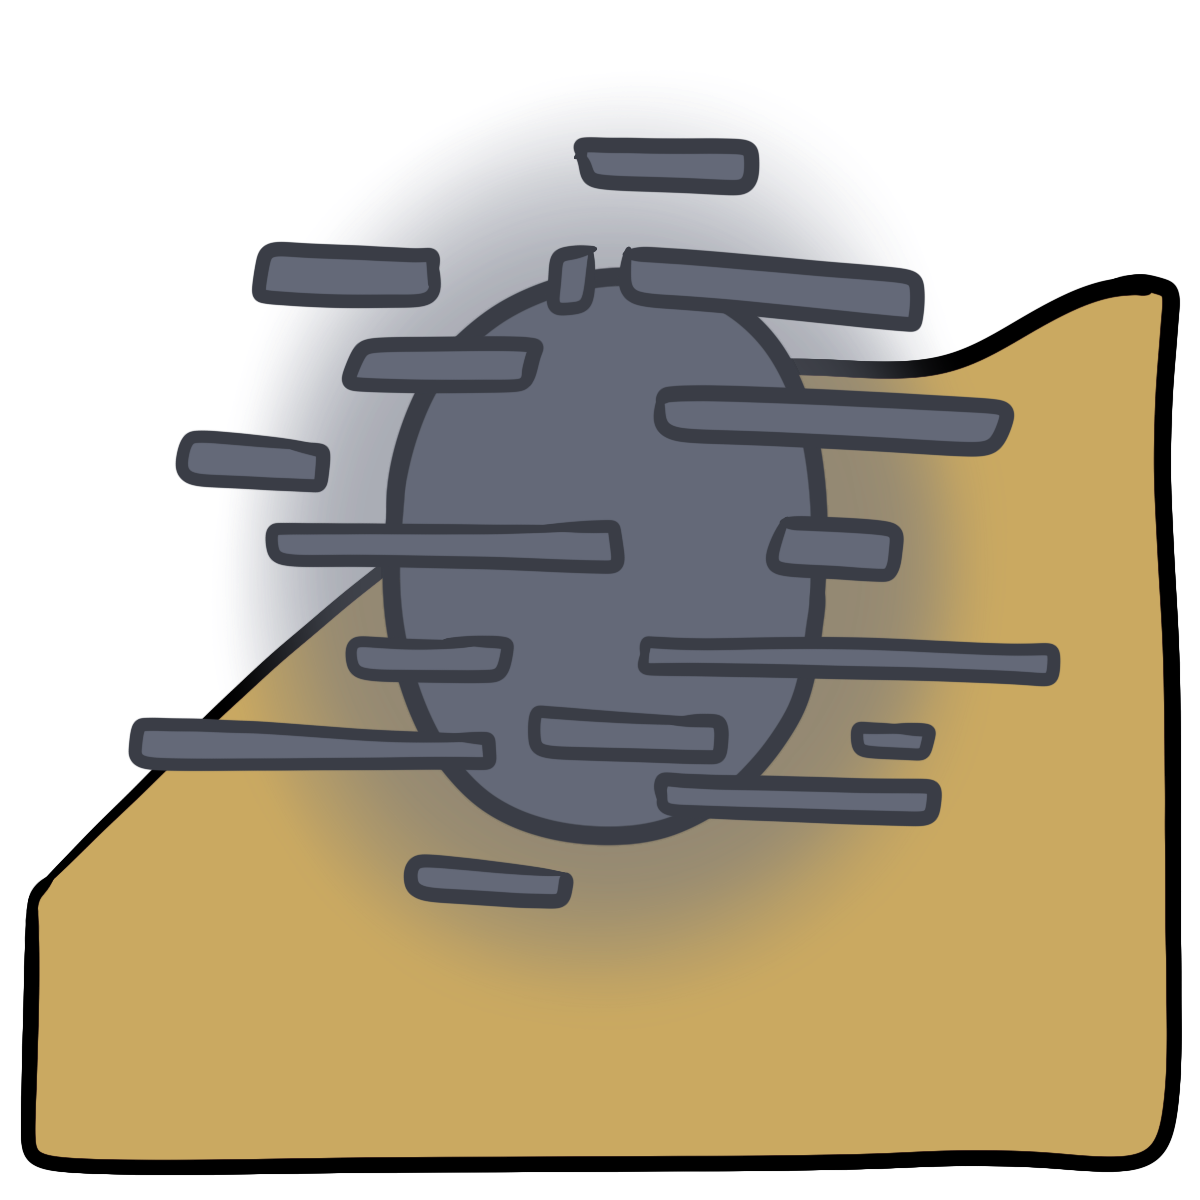 A dark gray glowing oval with horizontal thin rectangles around it. Curved yellow skin fills the bottom half of the background.